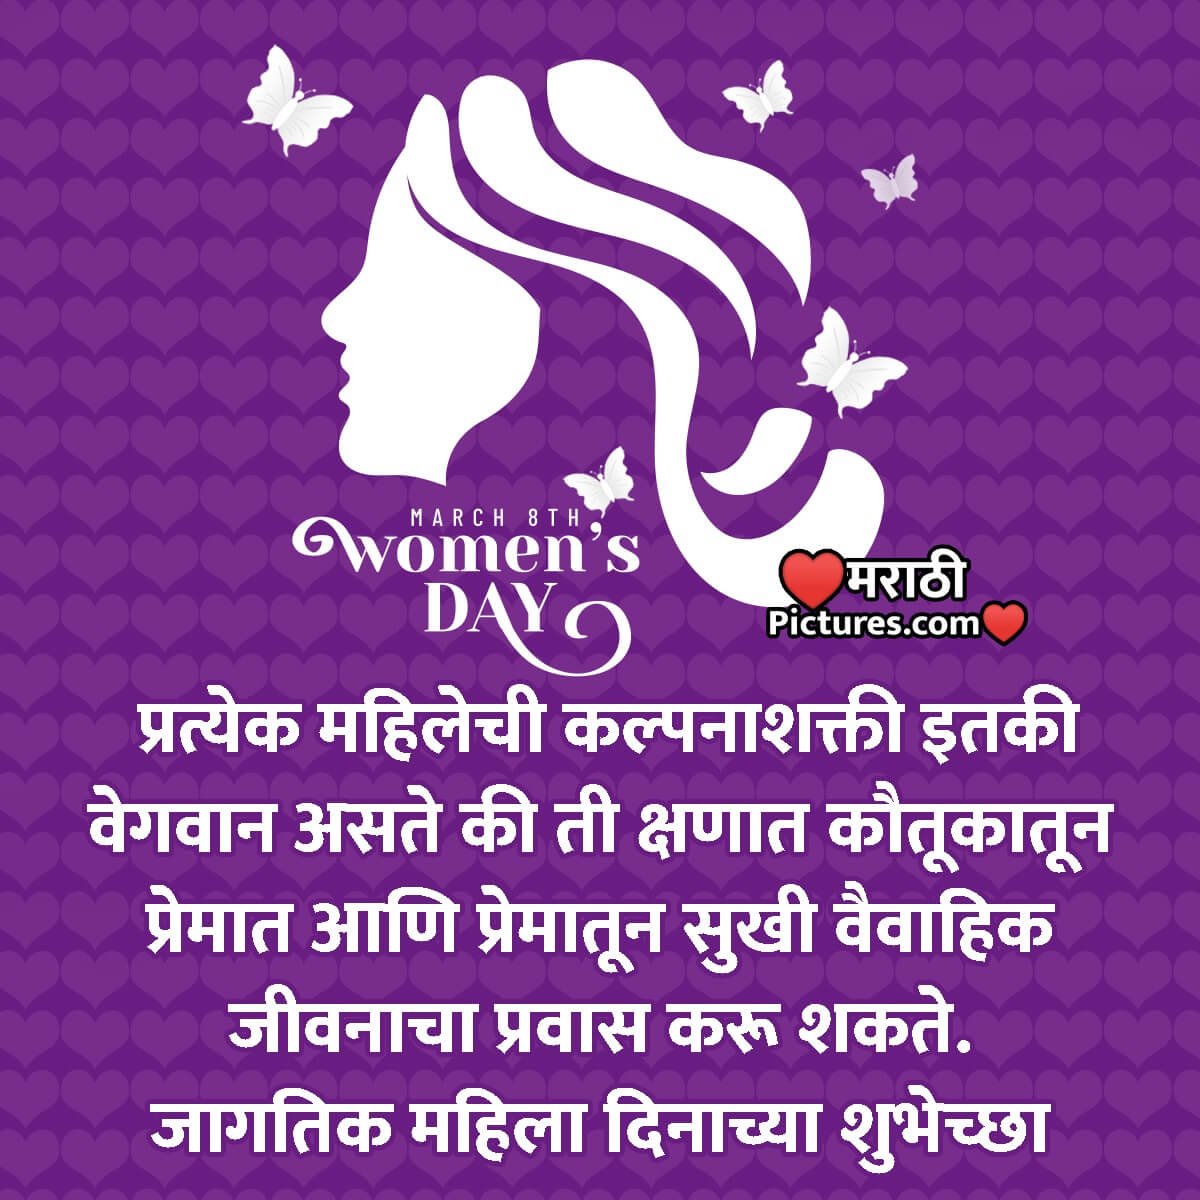 Greetings For Wife On Women’s Day In Marathi